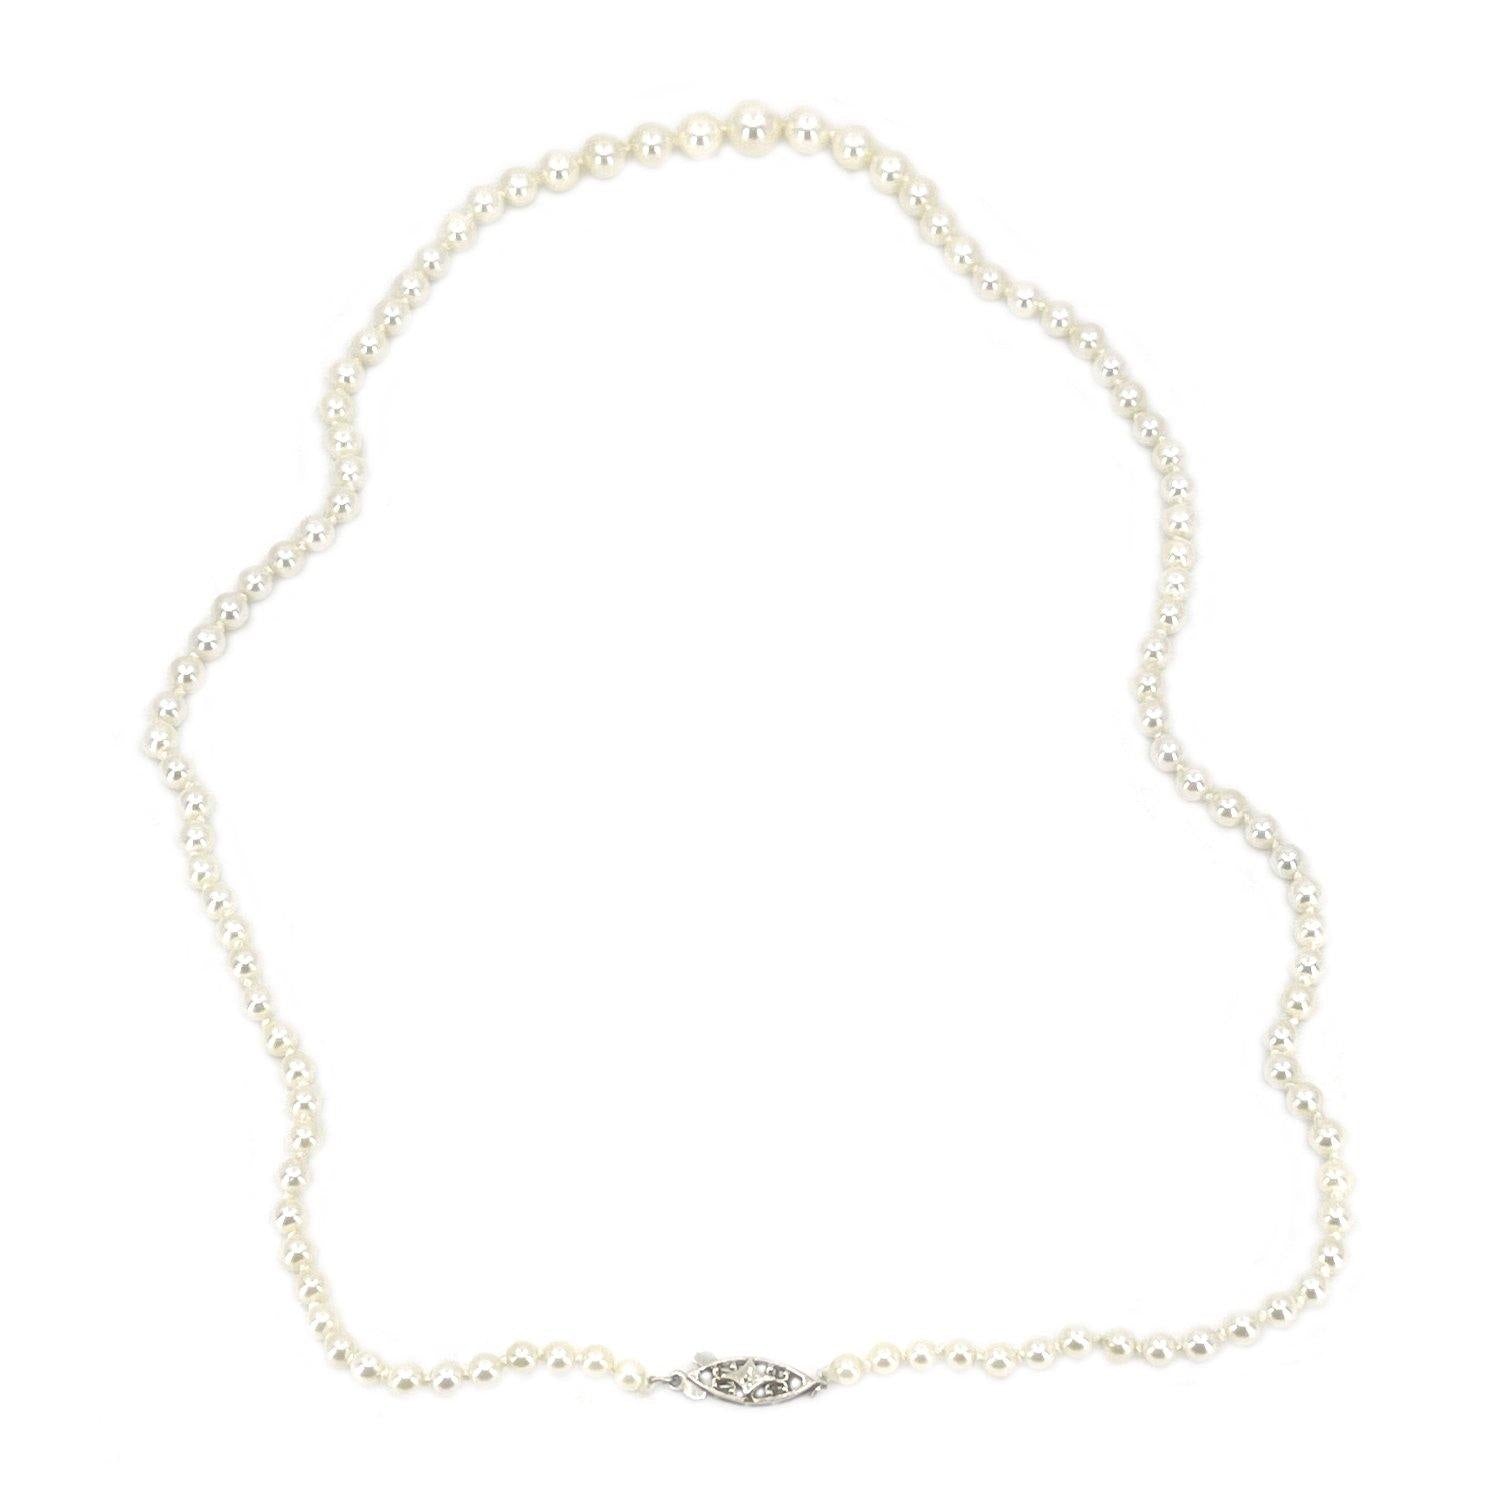 Art Nouveau Japanese Saltwater Cultured Akoya Pearl Necklace - 14K White Gold 20.25 Inch